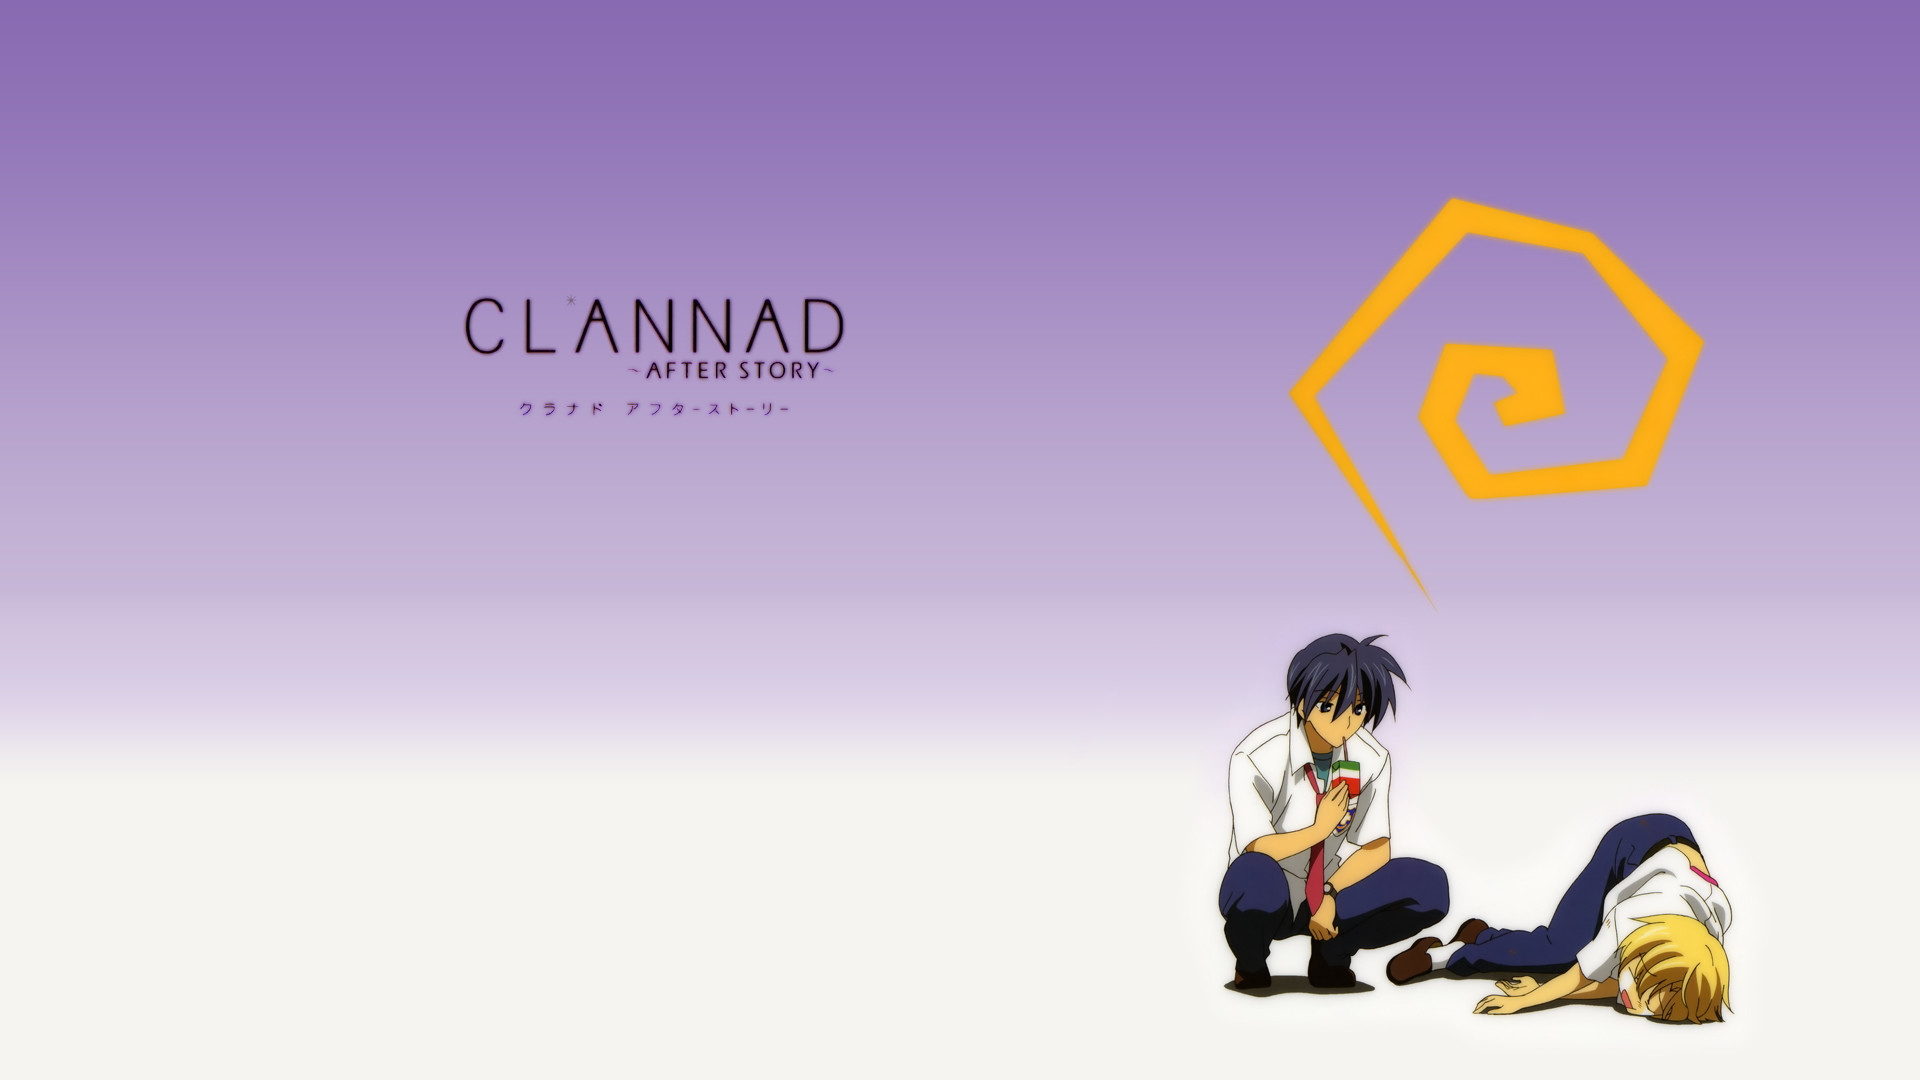 1920x1080 Clannad After Story Wallpaper 